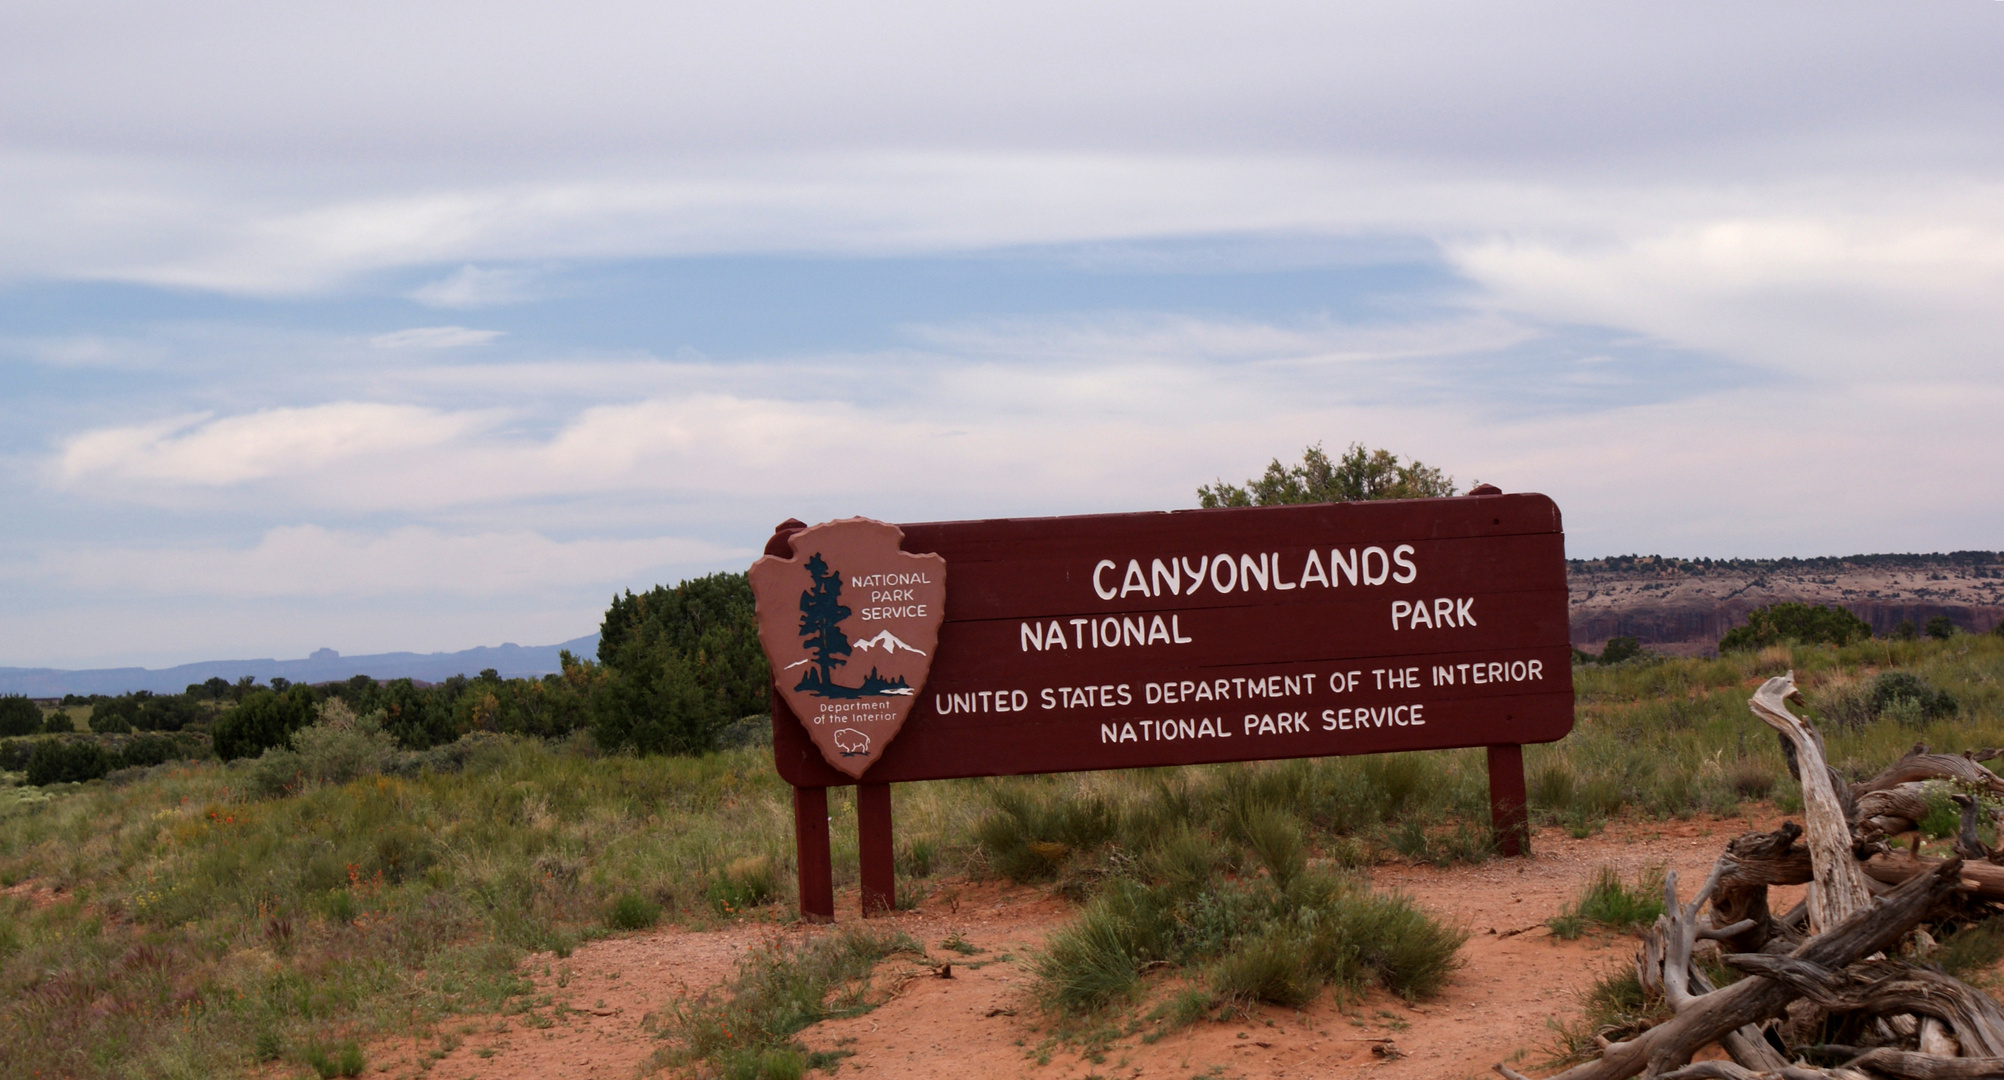 Canyionlands National Park